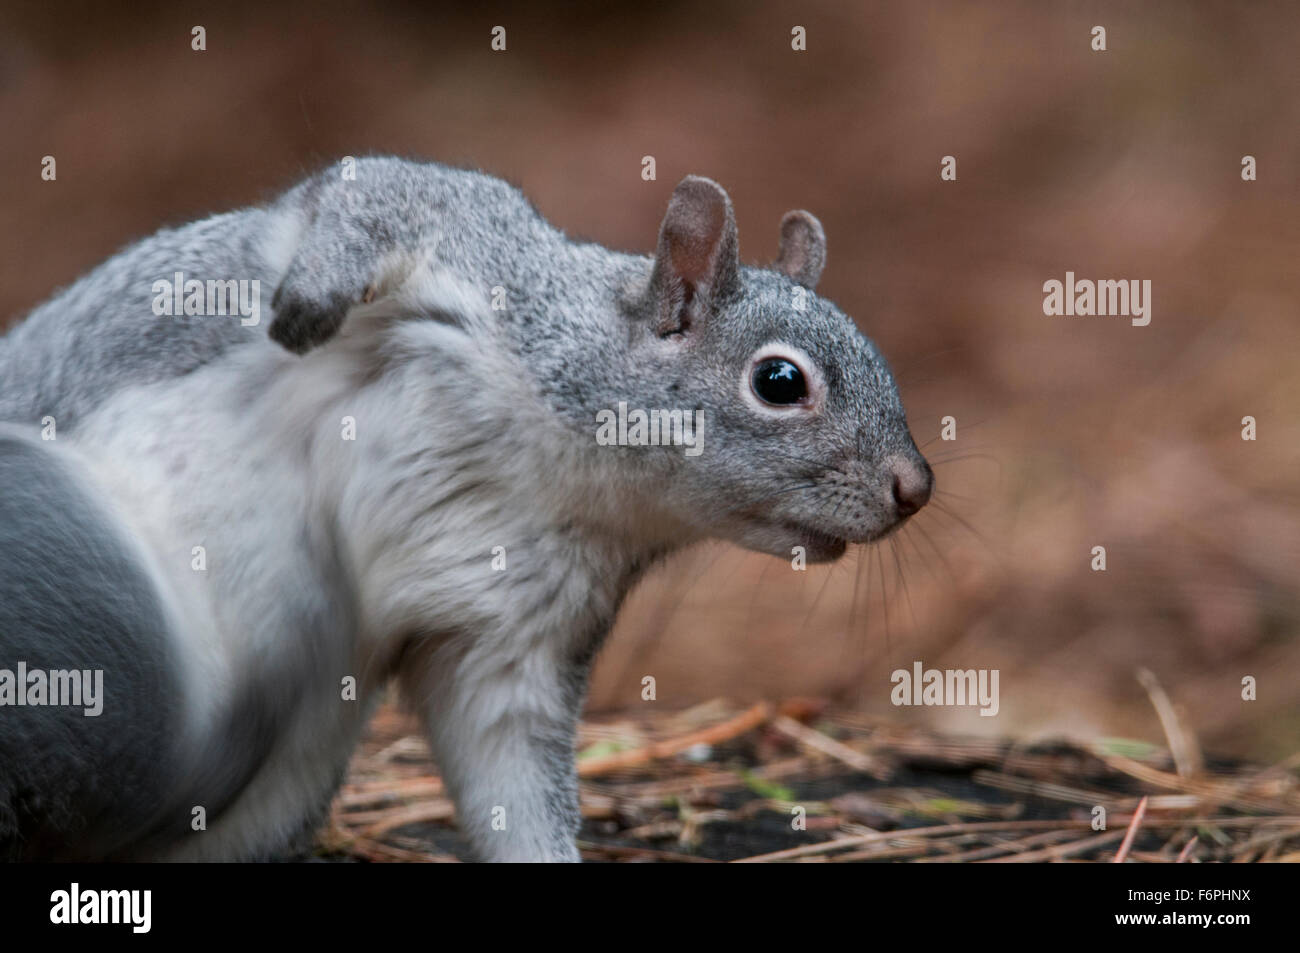 Western gray squirrel (Sciurus griseus) is an arboreal rodent who dwells in the forests of the Sierra foothills in California. Stock Photo